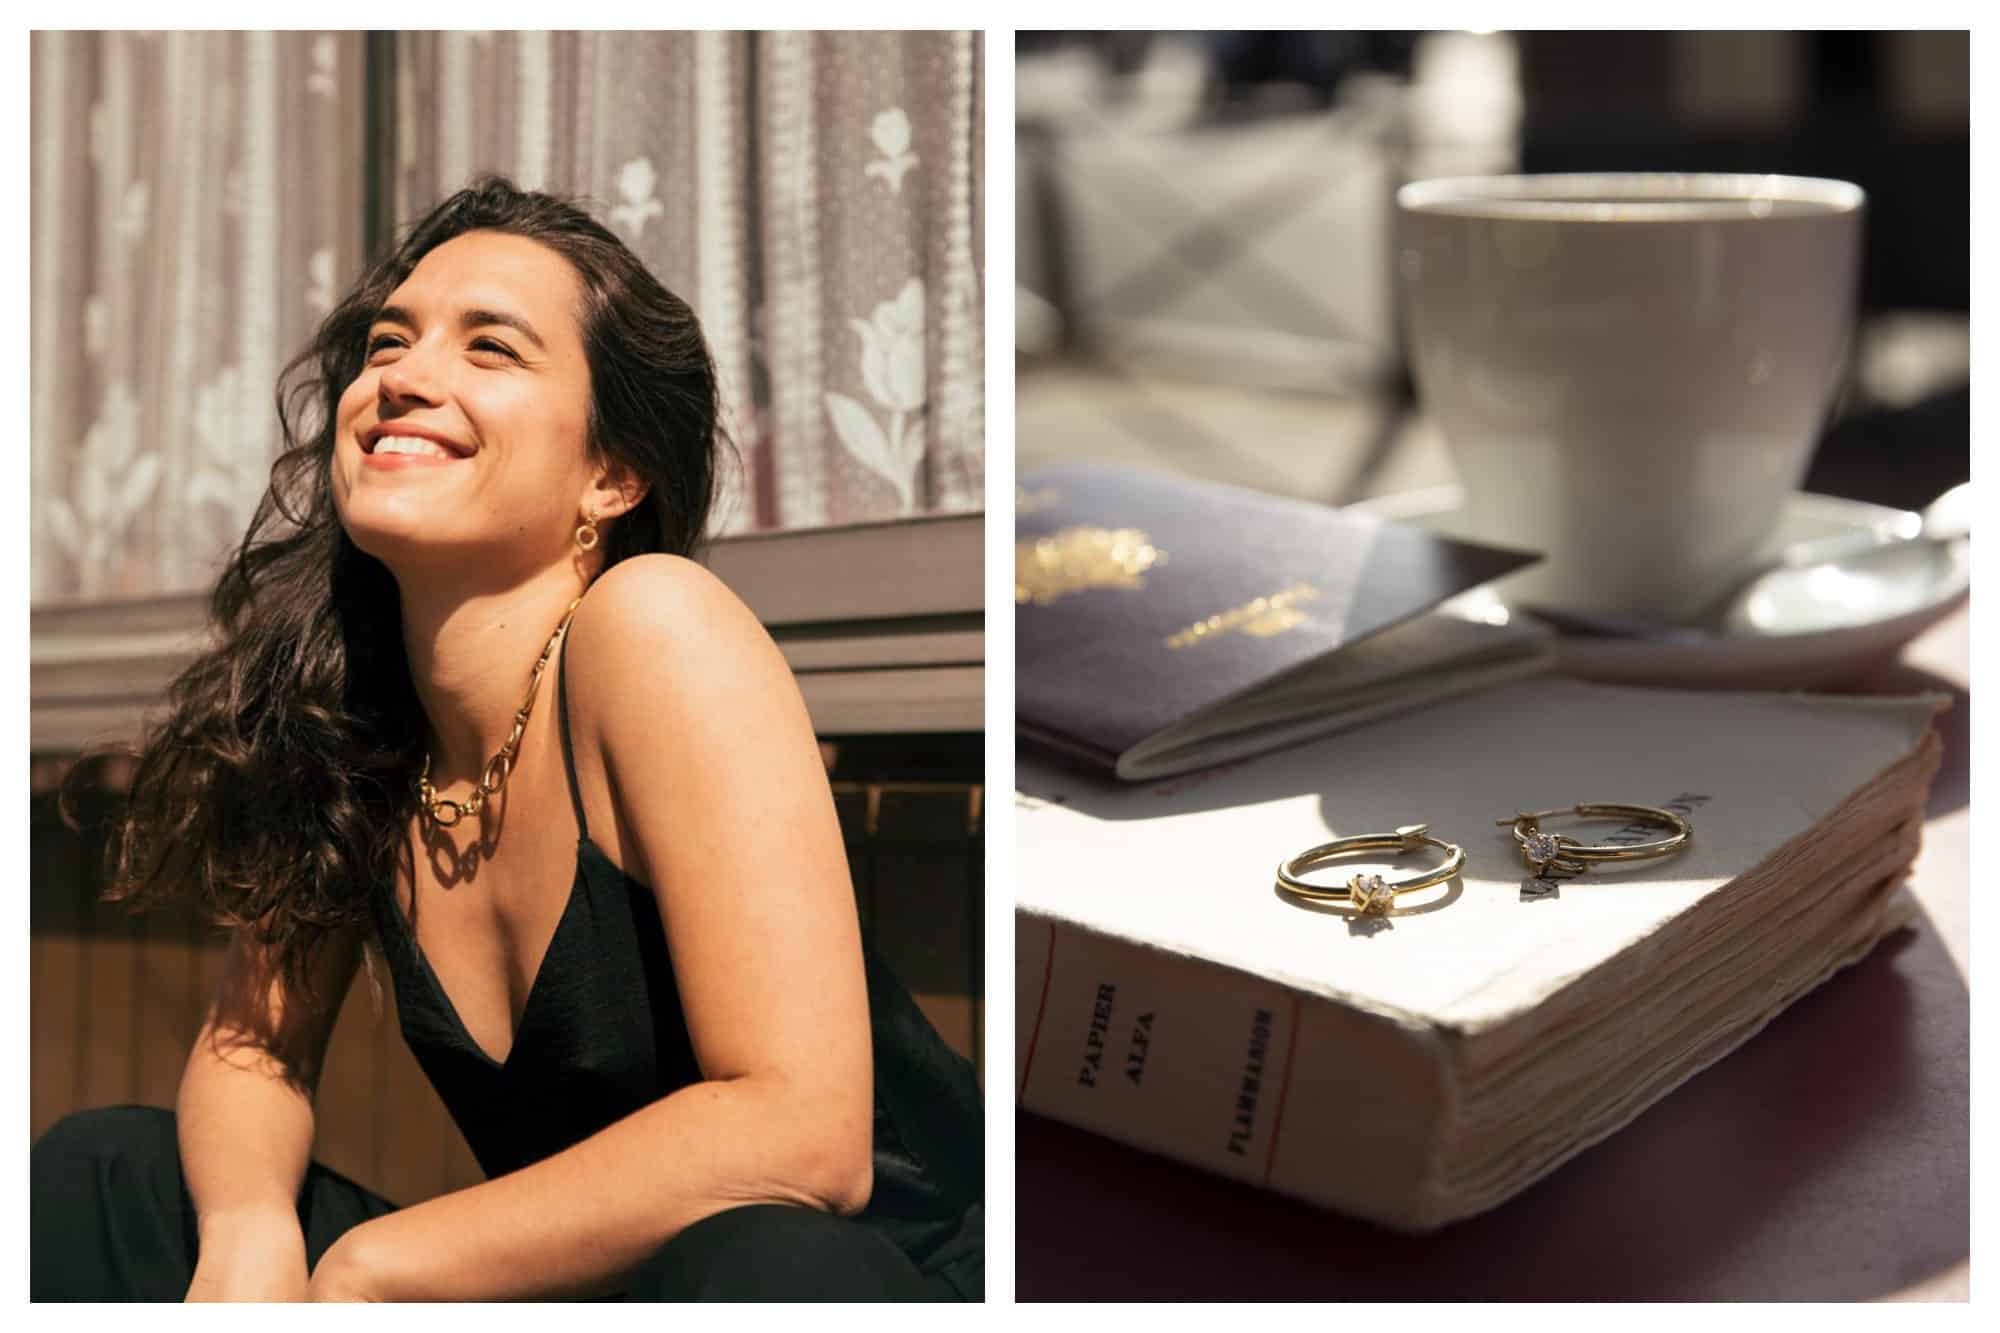 A girl smiling in the sunshine, wearing a gold chain Louise Damas necklace (left). Two gold rings resting on a book with a passport and a cup of coffee in the background (right).